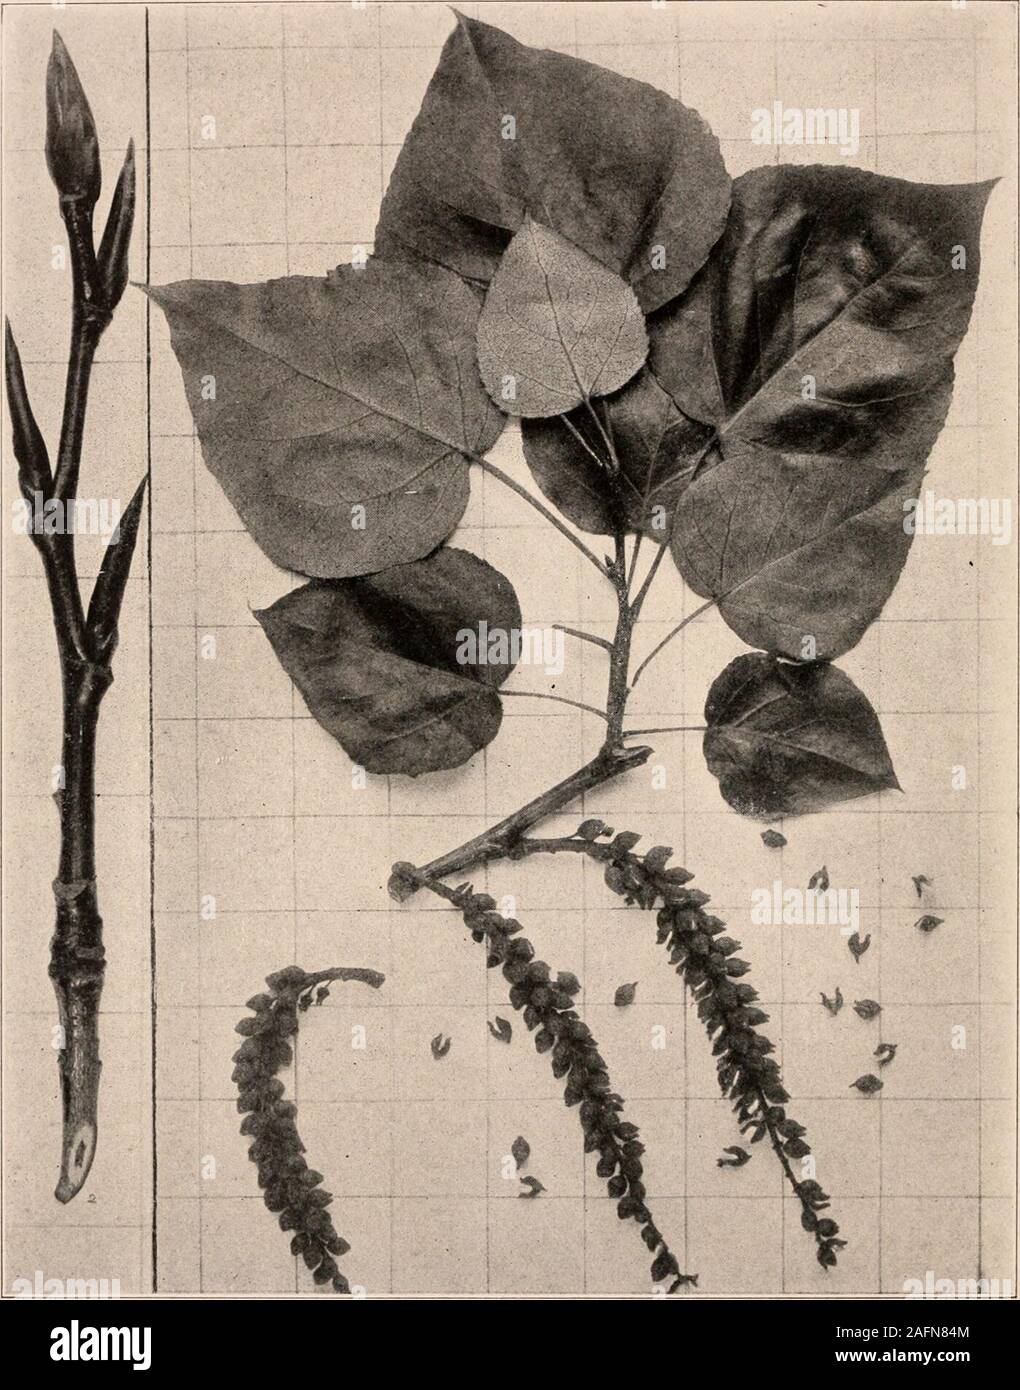 . Handbook of the trees of the northern states and Canada east of the Rocky mountains. Photo-descriptive. BALM OF GILEAD. Populus candlcans Ait.^. Fig. 16. Mature leaves and fruit, i ; branchlet in winter, 17. Trunk of a tree near Lowville, N. Y. Handbook of Tkees of the Xokthekx St: u Canada. 103 The Balm of Gilead when in its prime i» a beautiful large Poplar, attaining the height of70 or 80 ft. or more witli broad and irregularspreading top. and trunk attaining a thicknessof 3-G ft., vested in a rather thick firmly ridgedgray bark at base, while the ujjper trunk andbranches are covered with Stock Photo